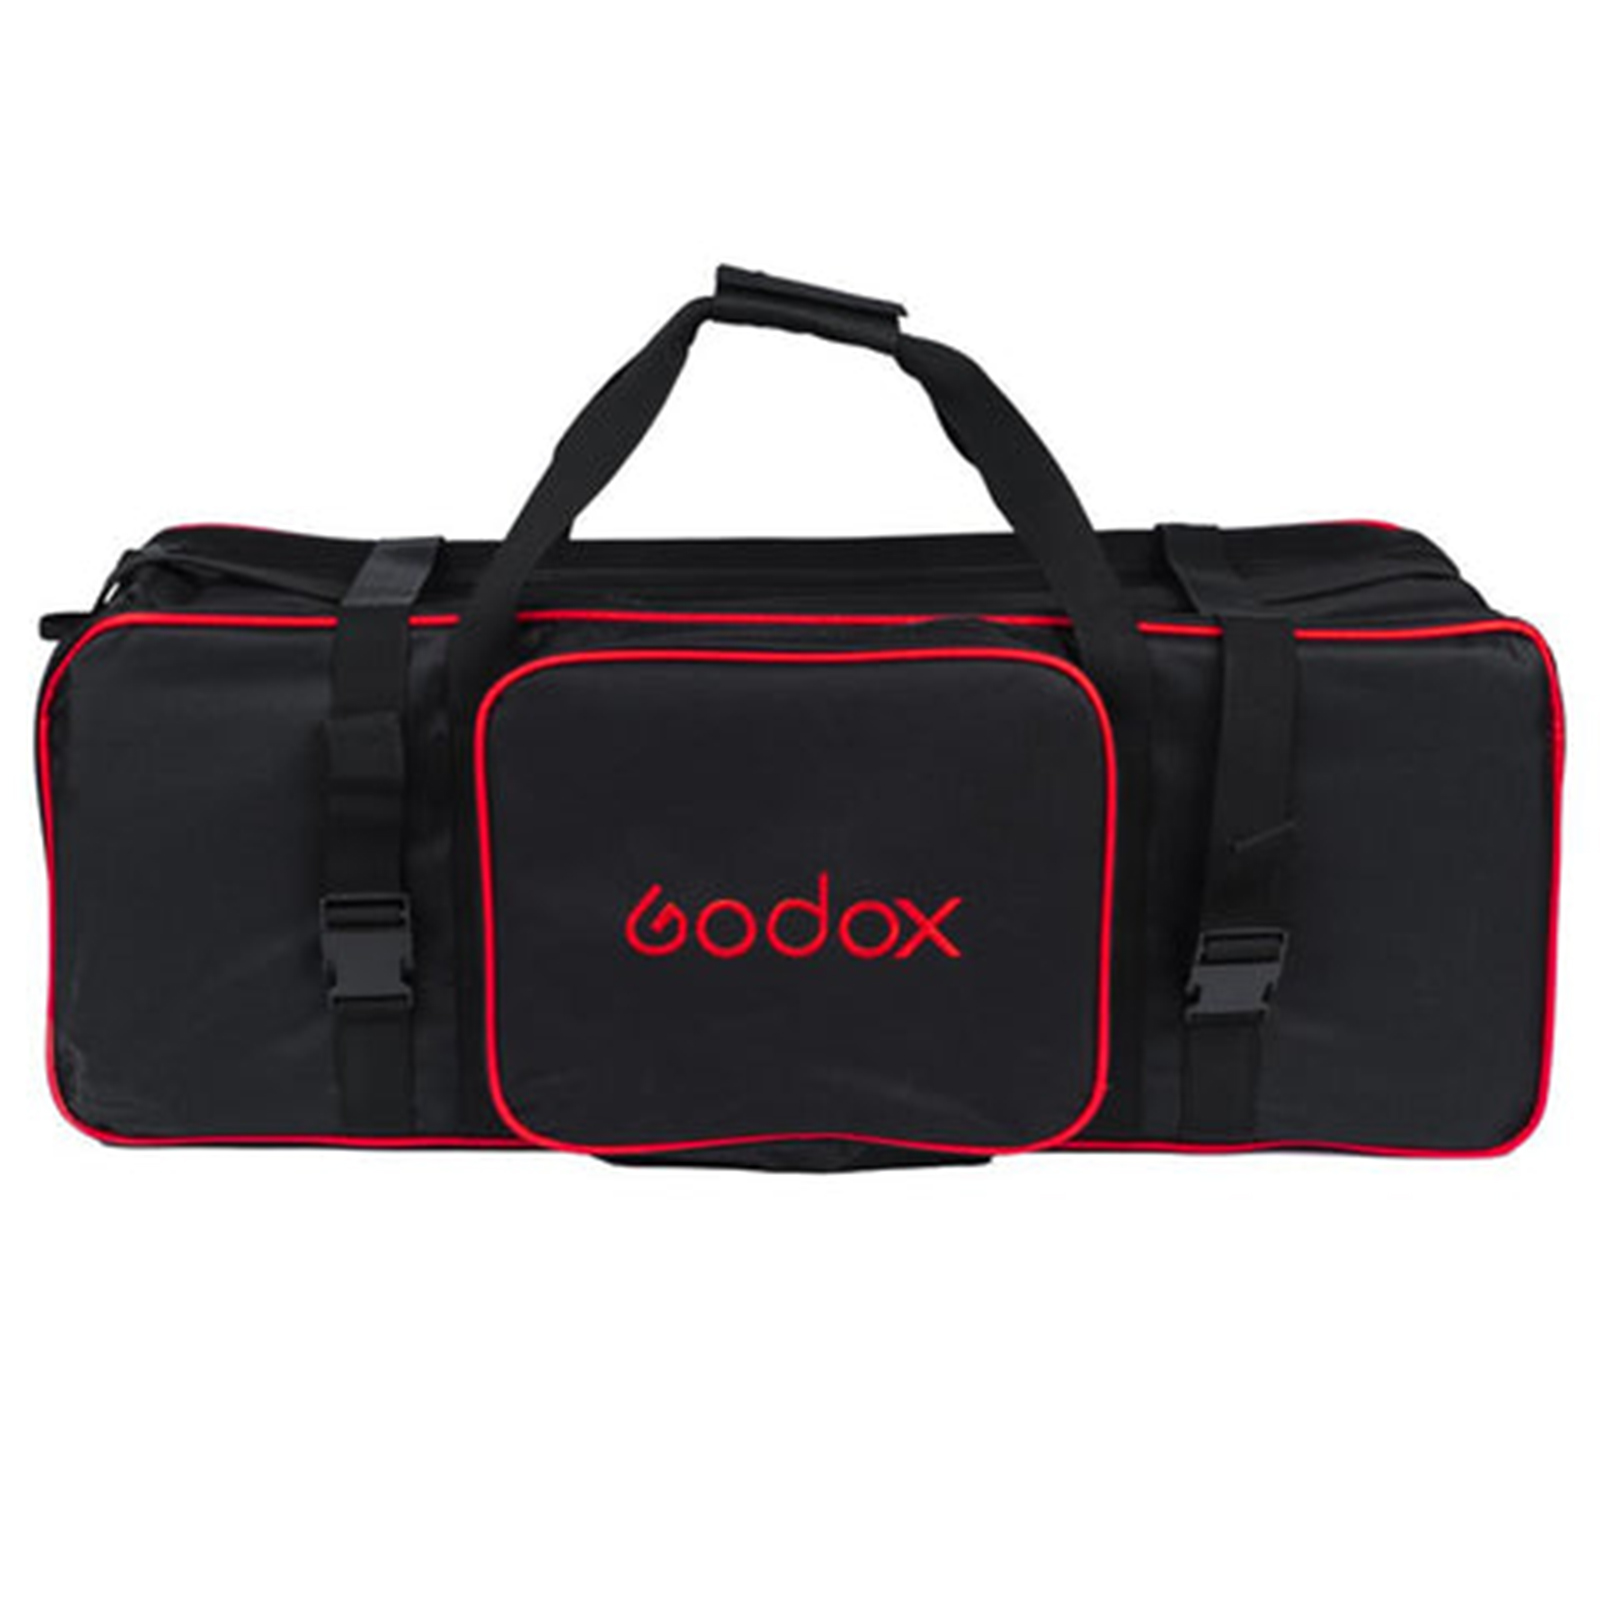 Image of Godox CB05 Carrying Bag For Studio Flashes